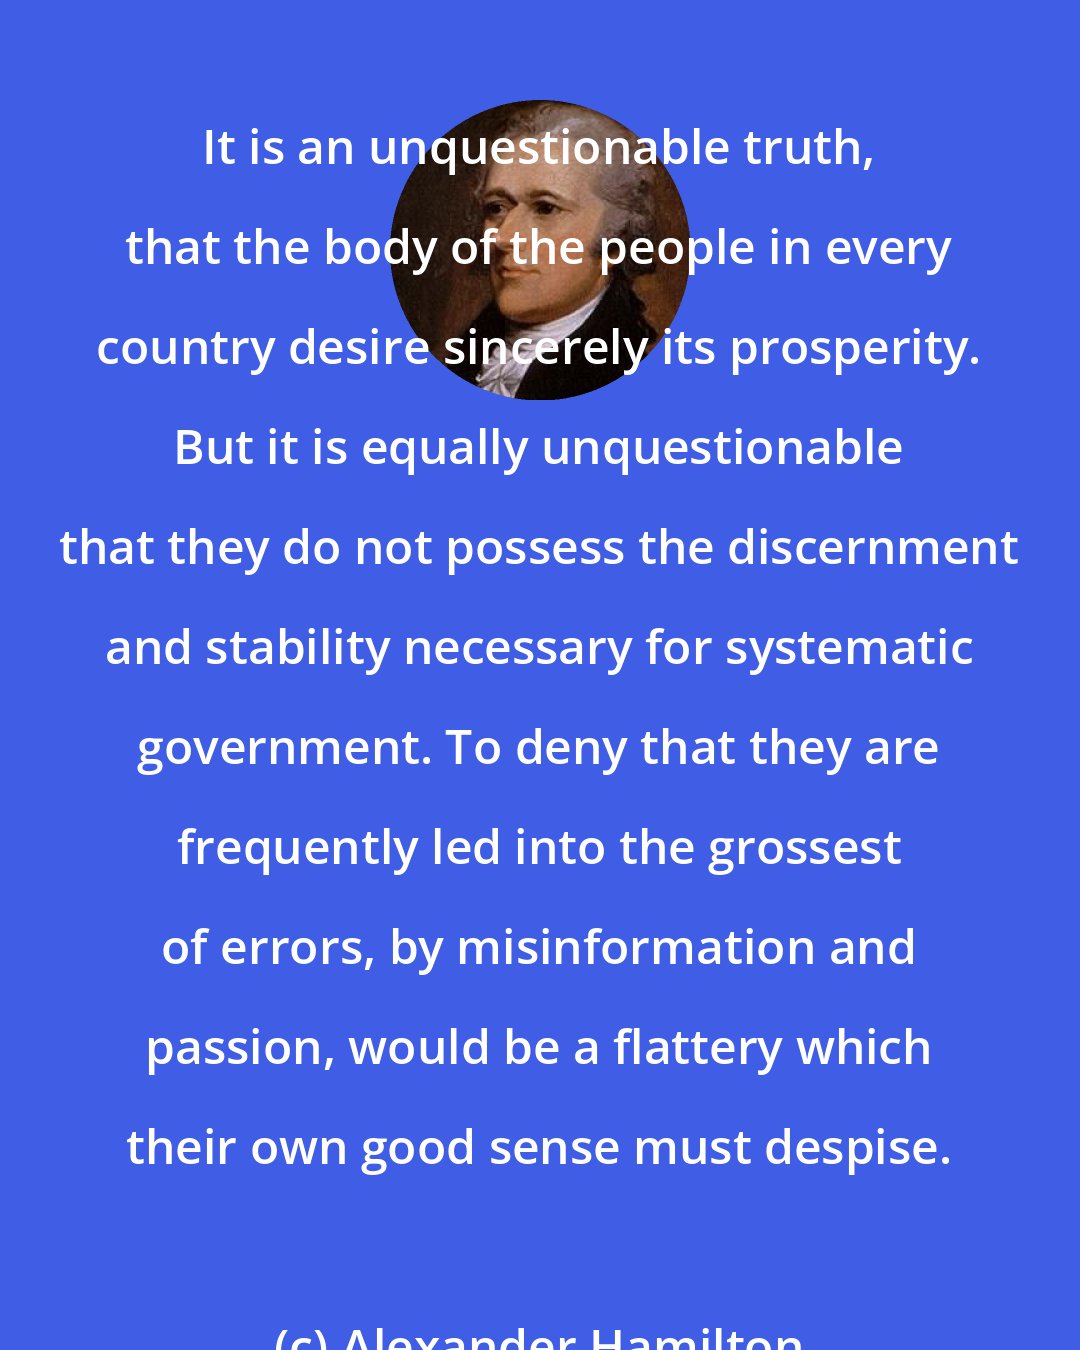 Alexander Hamilton: It is an unquestionable truth, that the body of the people in every country desire sincerely its prosperity. But it is equally unquestionable that they do not possess the discernment and stability necessary for systematic government. To deny that they are frequently led into the grossest of errors, by misinformation and passion, would be a flattery which their own good sense must despise.